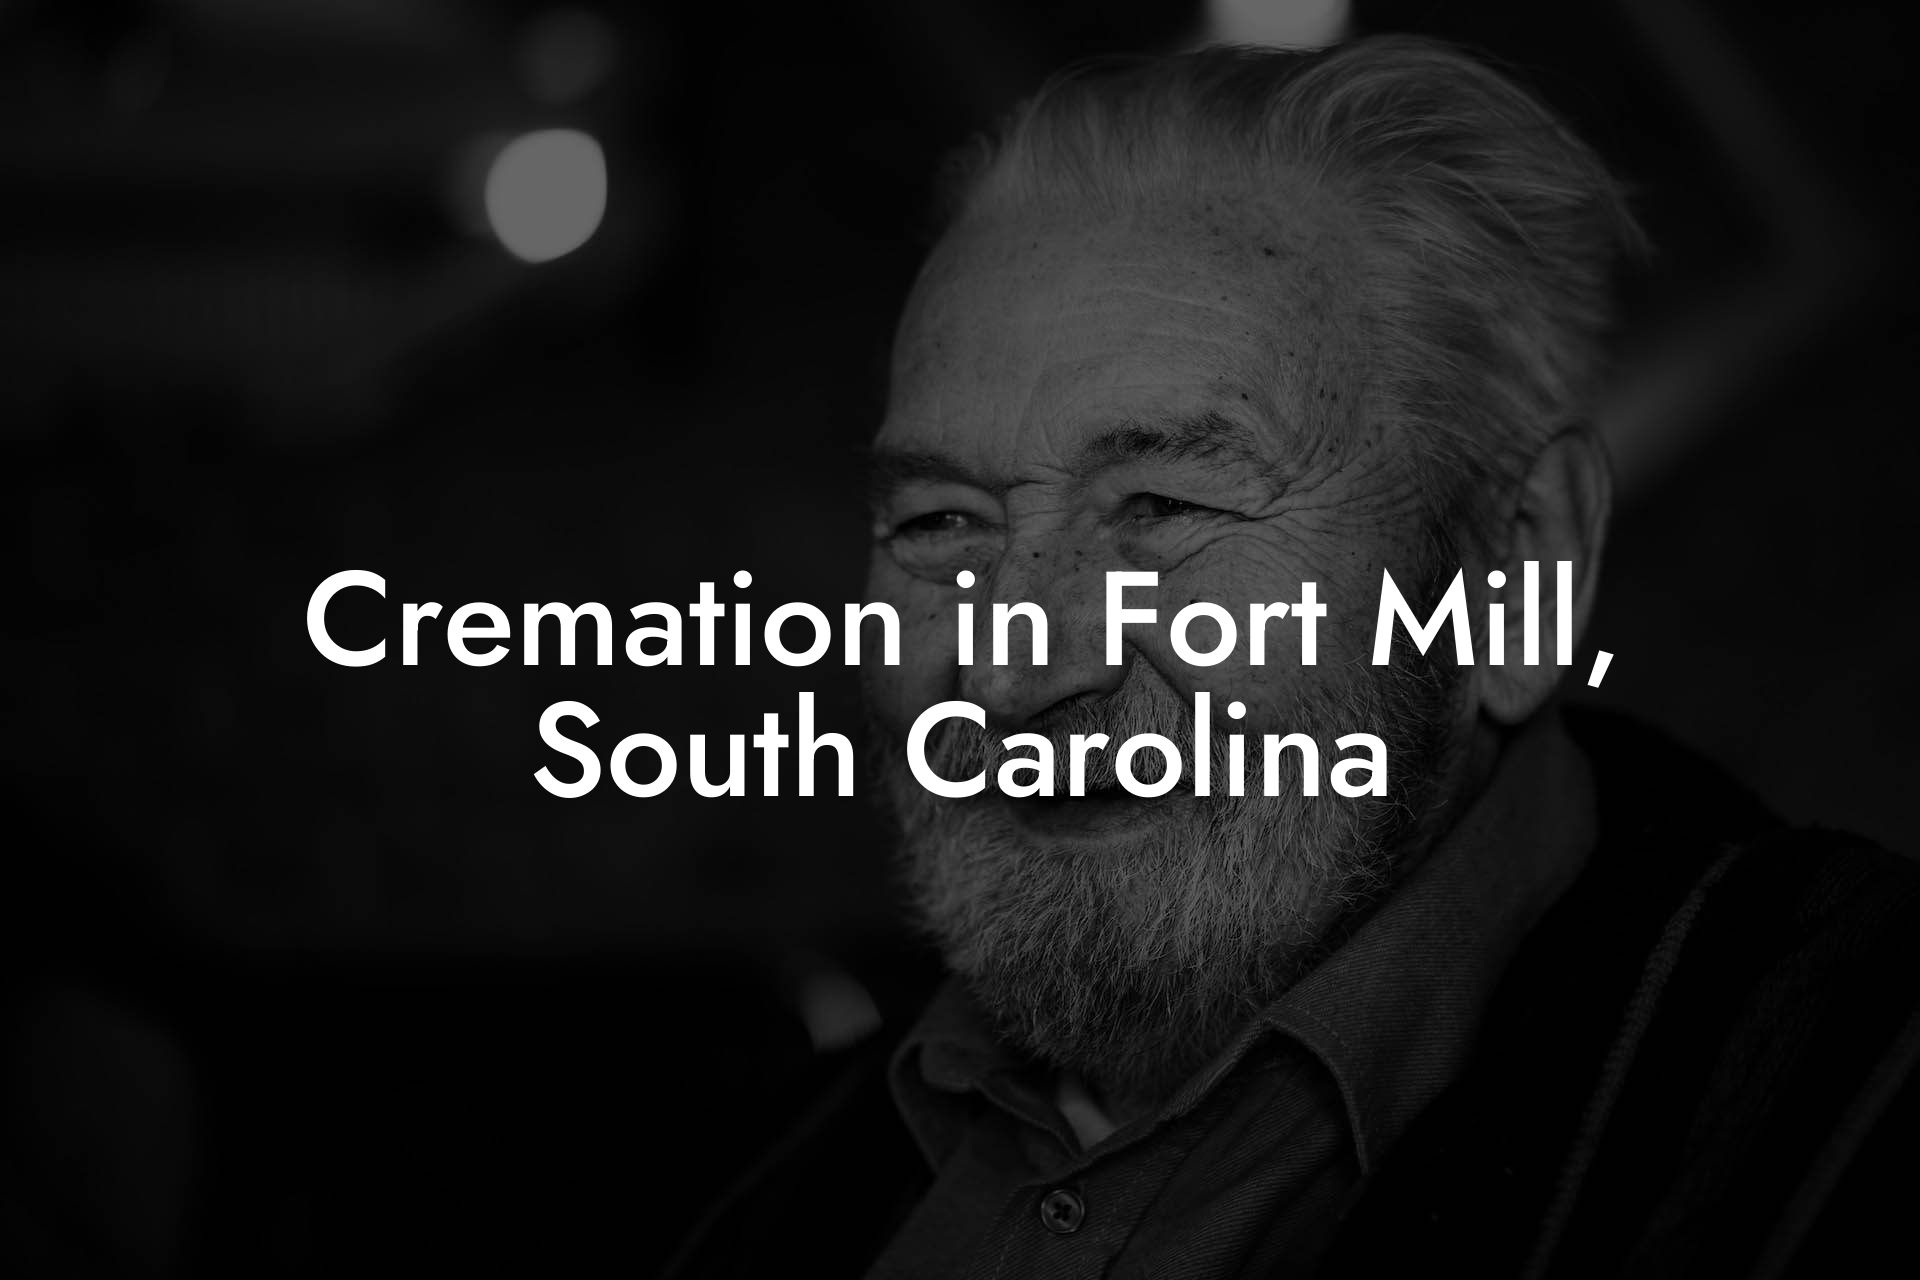 Cremation in Fort Mill, South Carolina